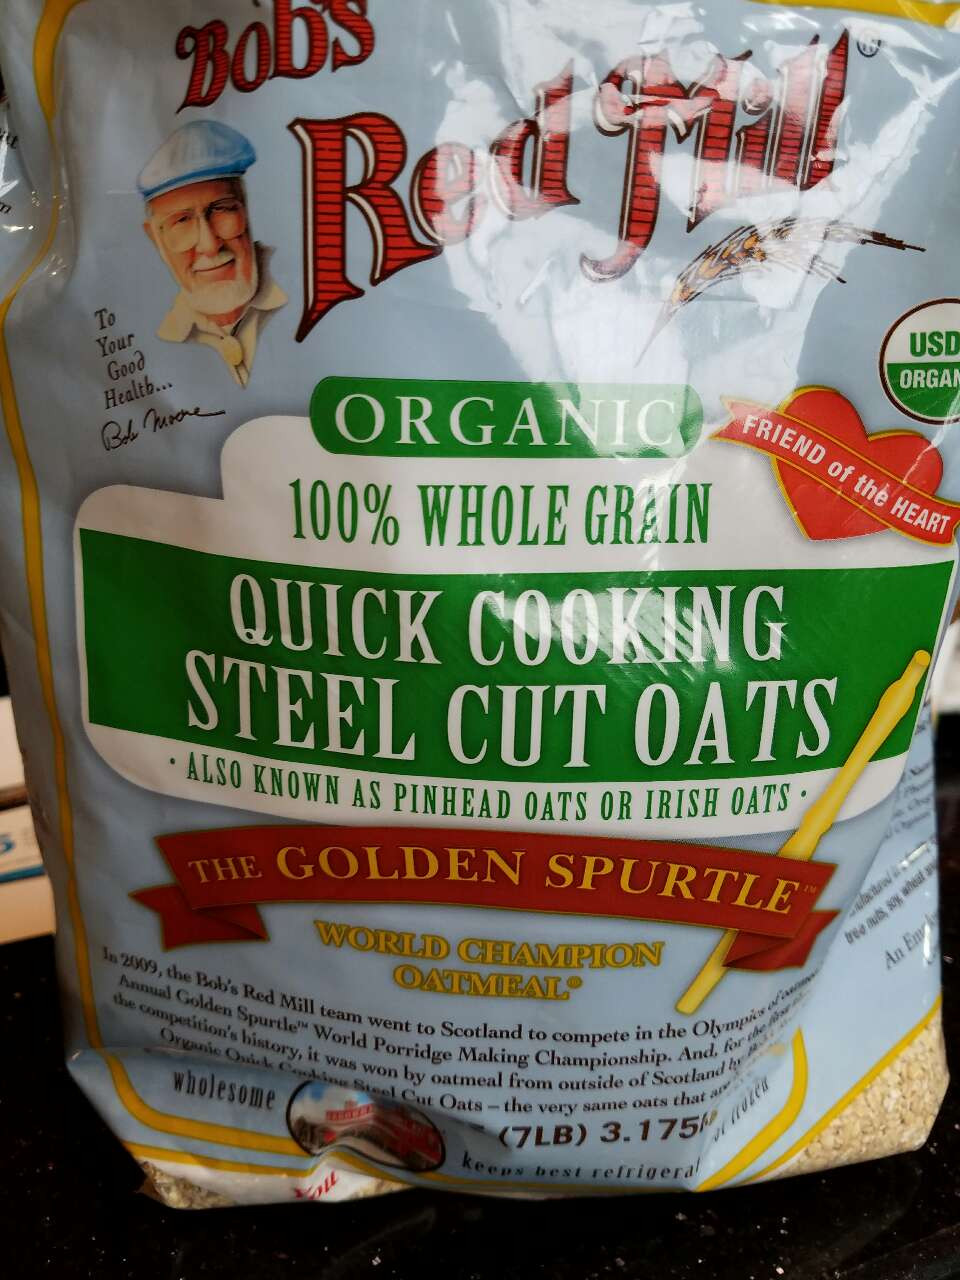 Bob'S Red Mill Quick Cooking Steel Cut Oats
 Bob s Red Mill Organic Whole Grain Quick Cooking